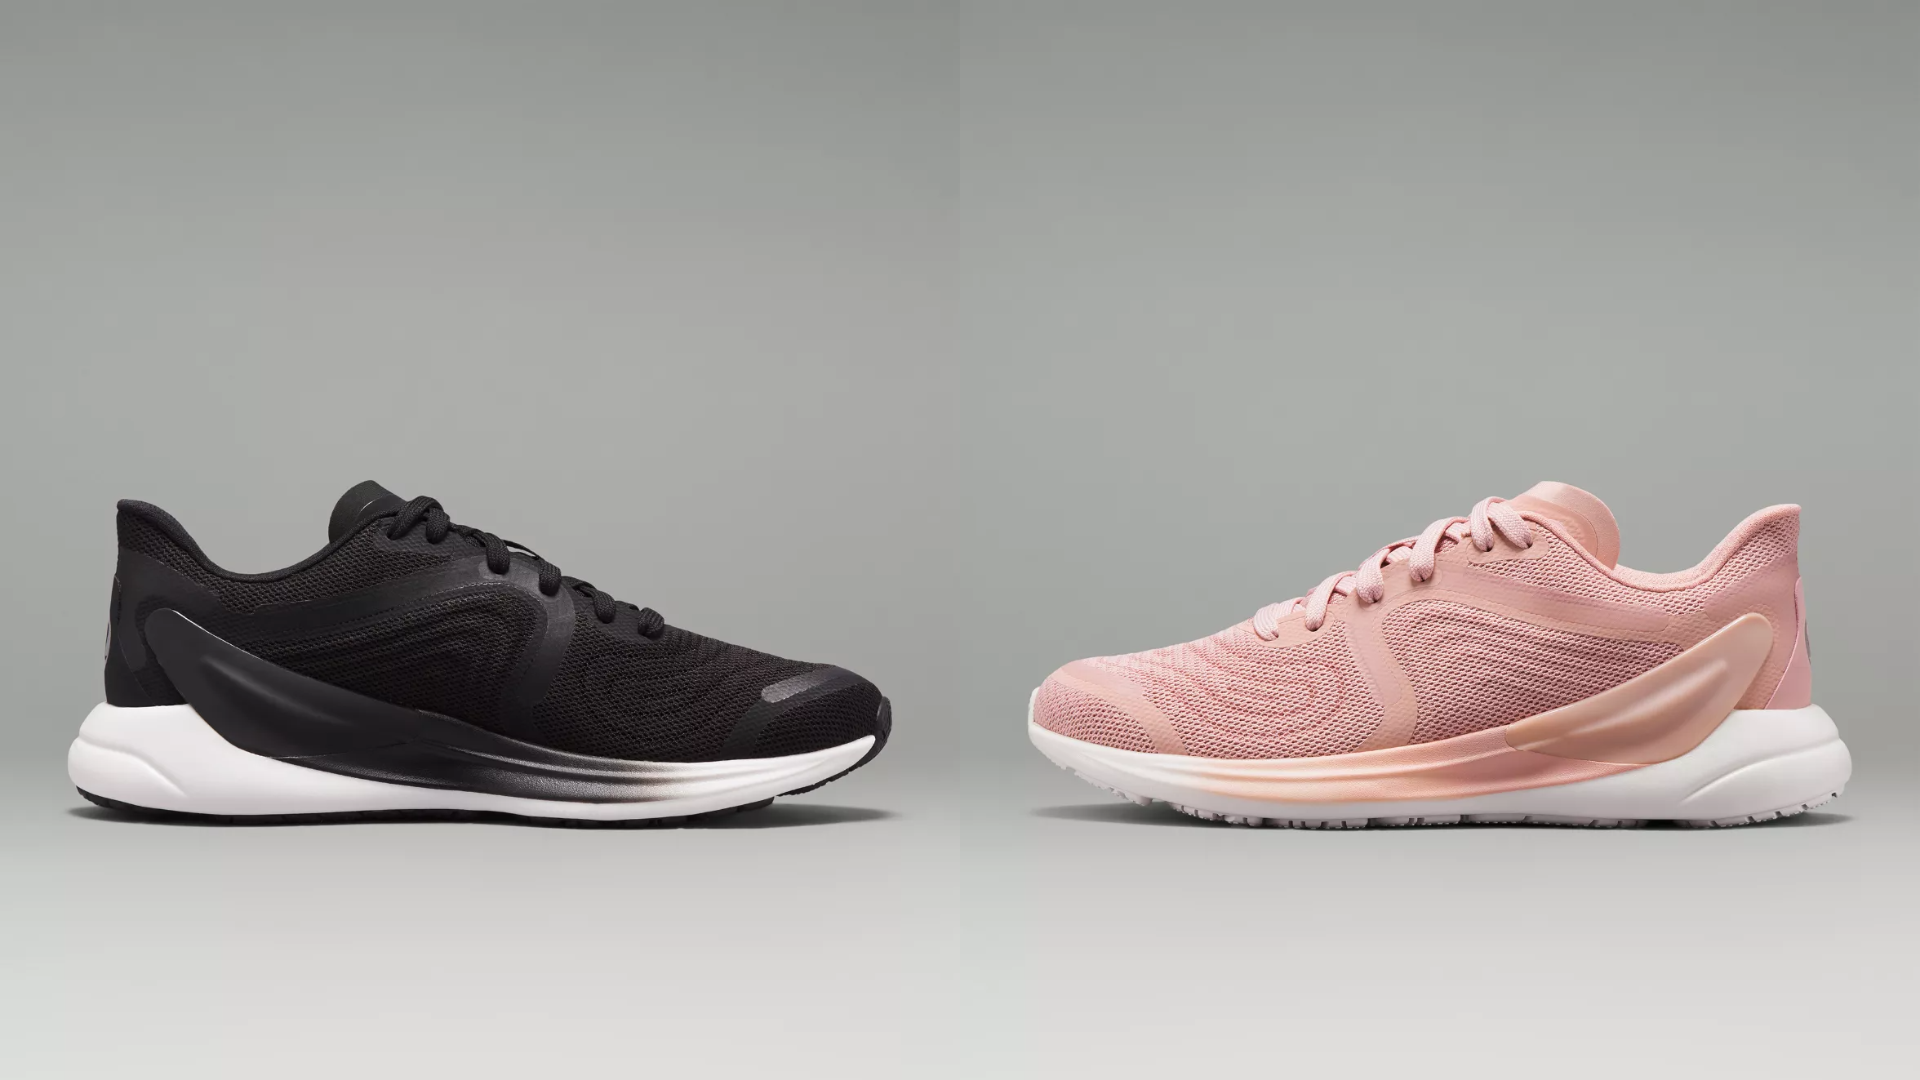 A black and pink Blissfeel 2 Women's Running Shoe face each other